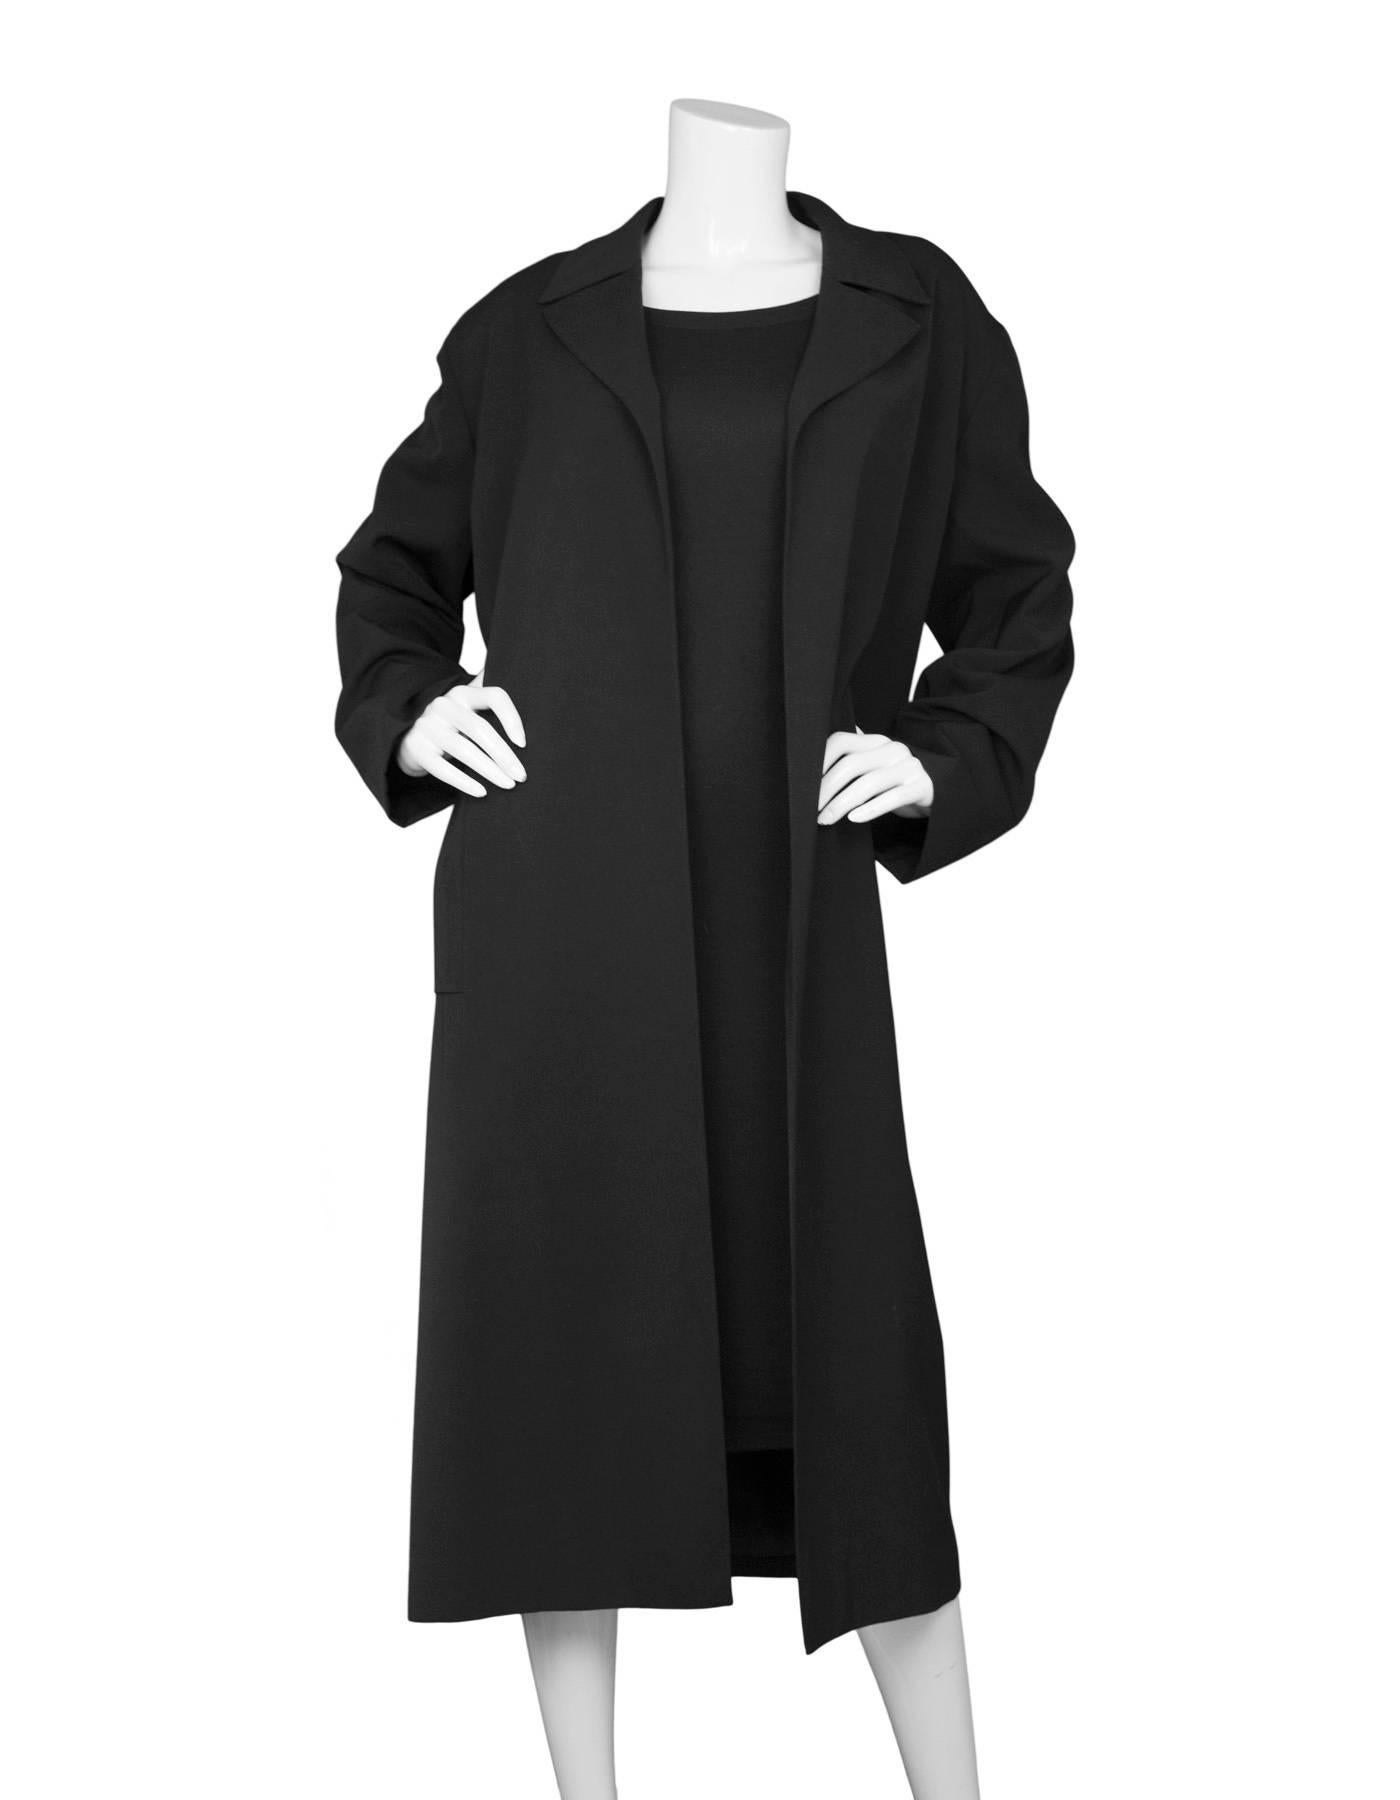 Chanel Black Open Front Trench Coat 
*Note: Non-Chanel waist belt has been added*

Made In: France
Year of Production: 1996
Color: Black
Composition: 100% wool
Lining: Black, 100% silk
Closure/Opening: Open front with added waist belt
Exterior